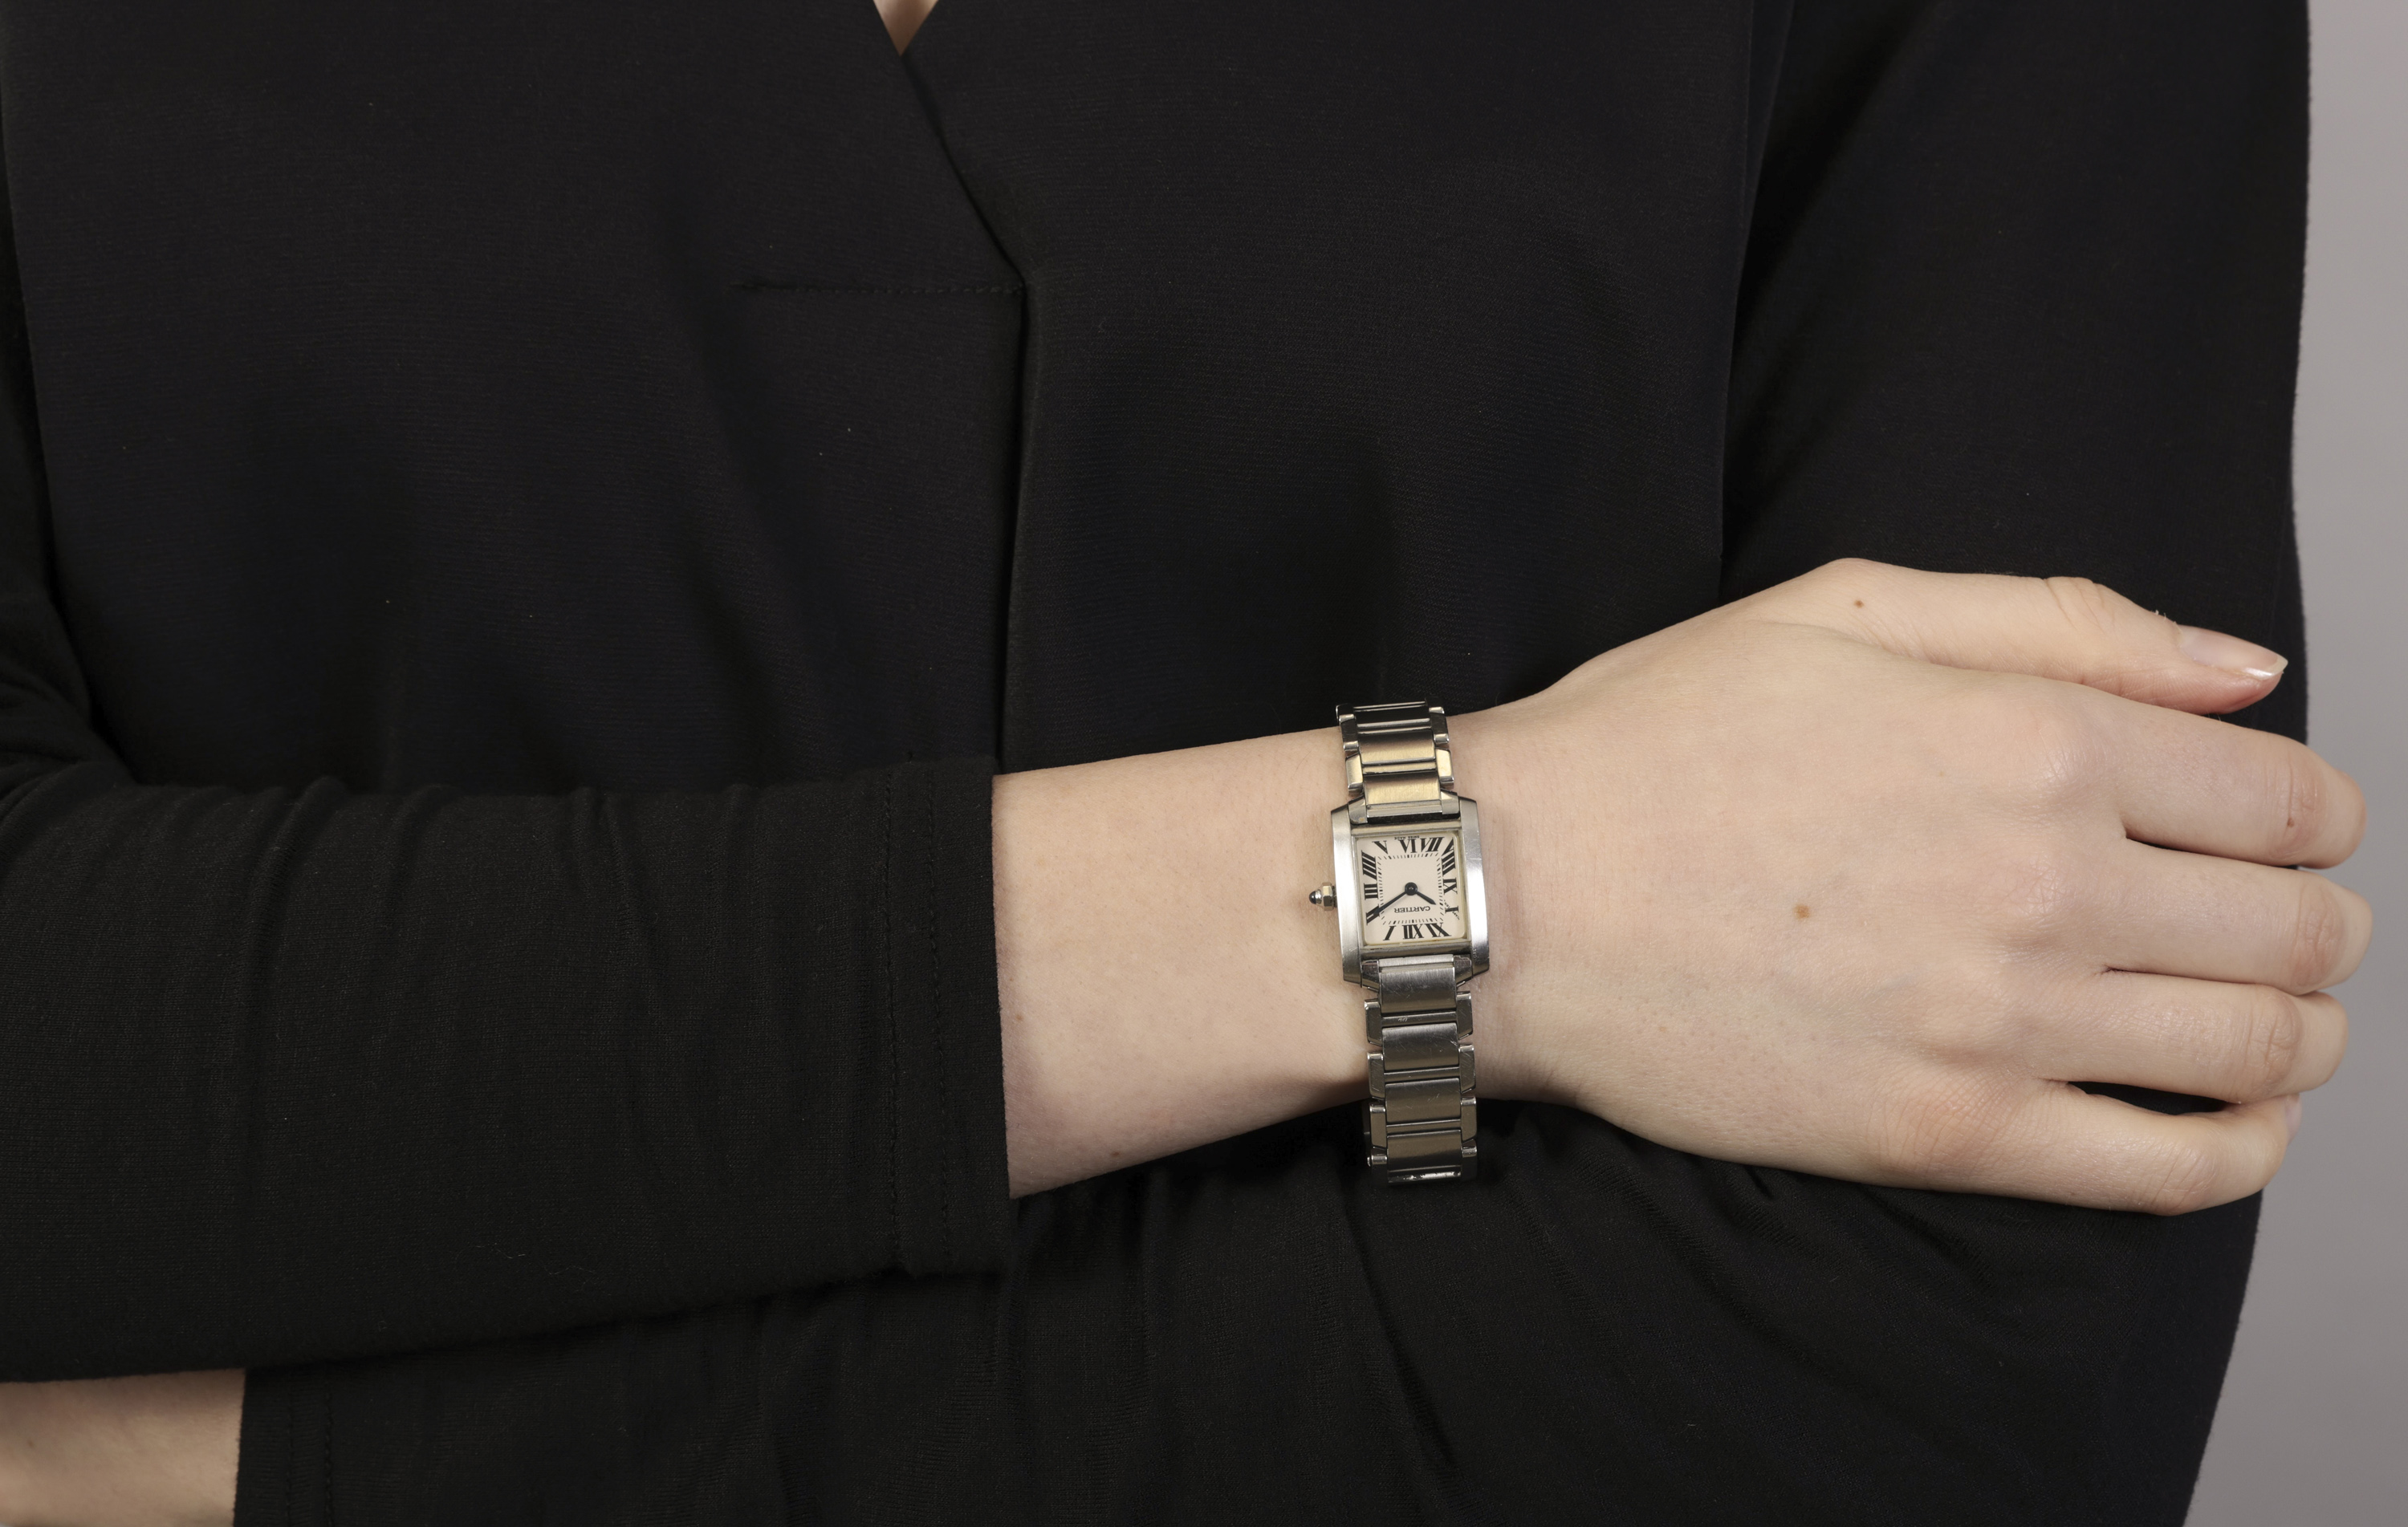 A LADY'S STAINLESS STEEL 'TANK FRANCAISE' QUARTZ BRACELET WATCH, BY CARTIER 4-jewel Cal. 057 - Image 4 of 5